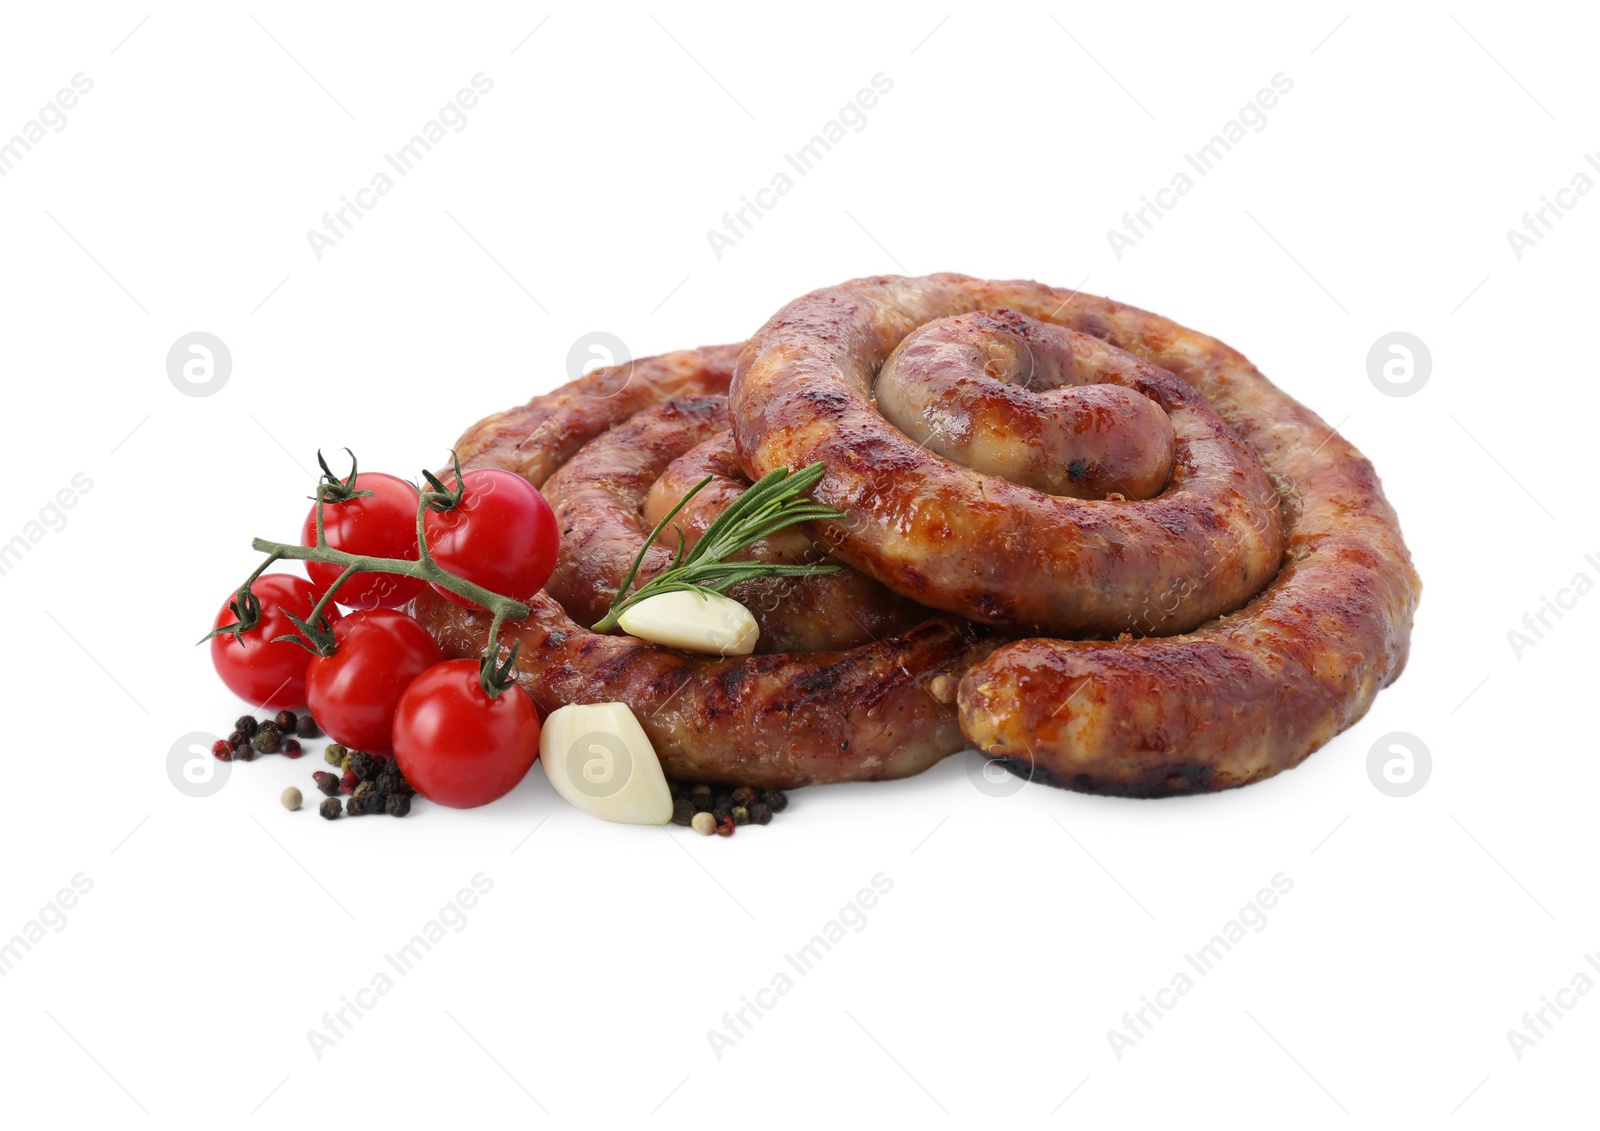 Photo of Delicious homemade sausages with spices and tomatoes isolated on white